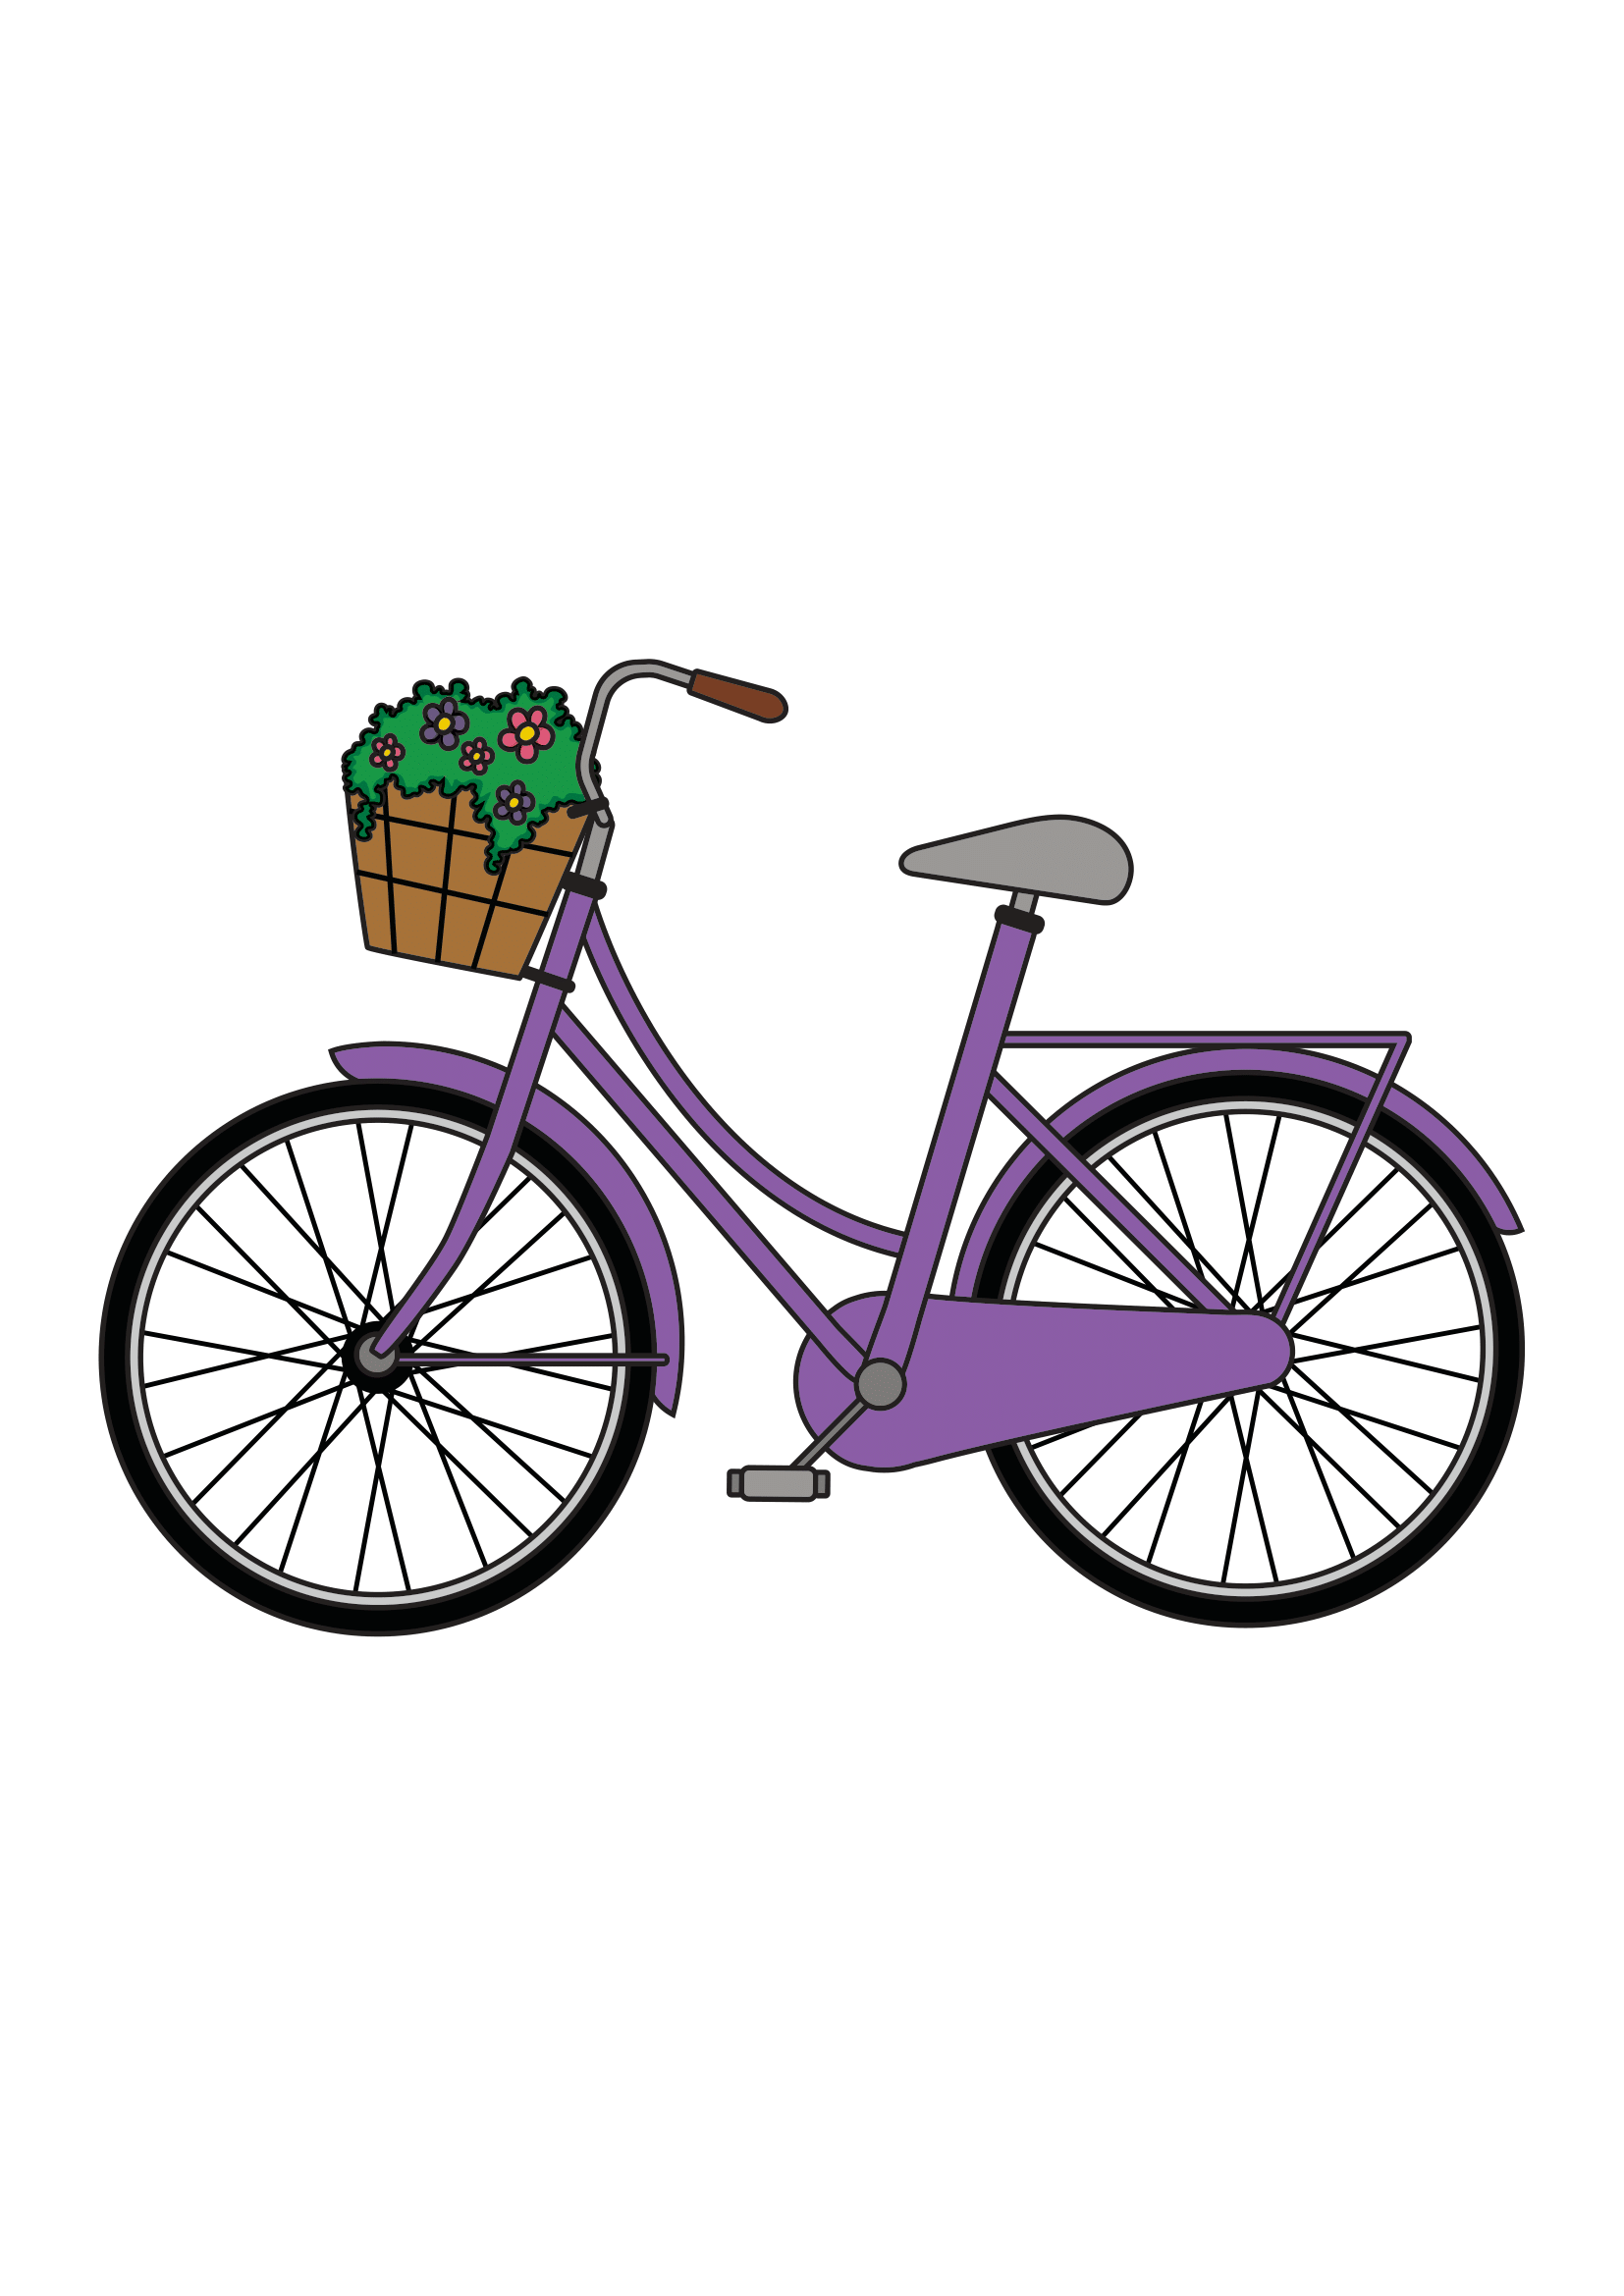 How to Draw A Bicycle Step by Step Printable